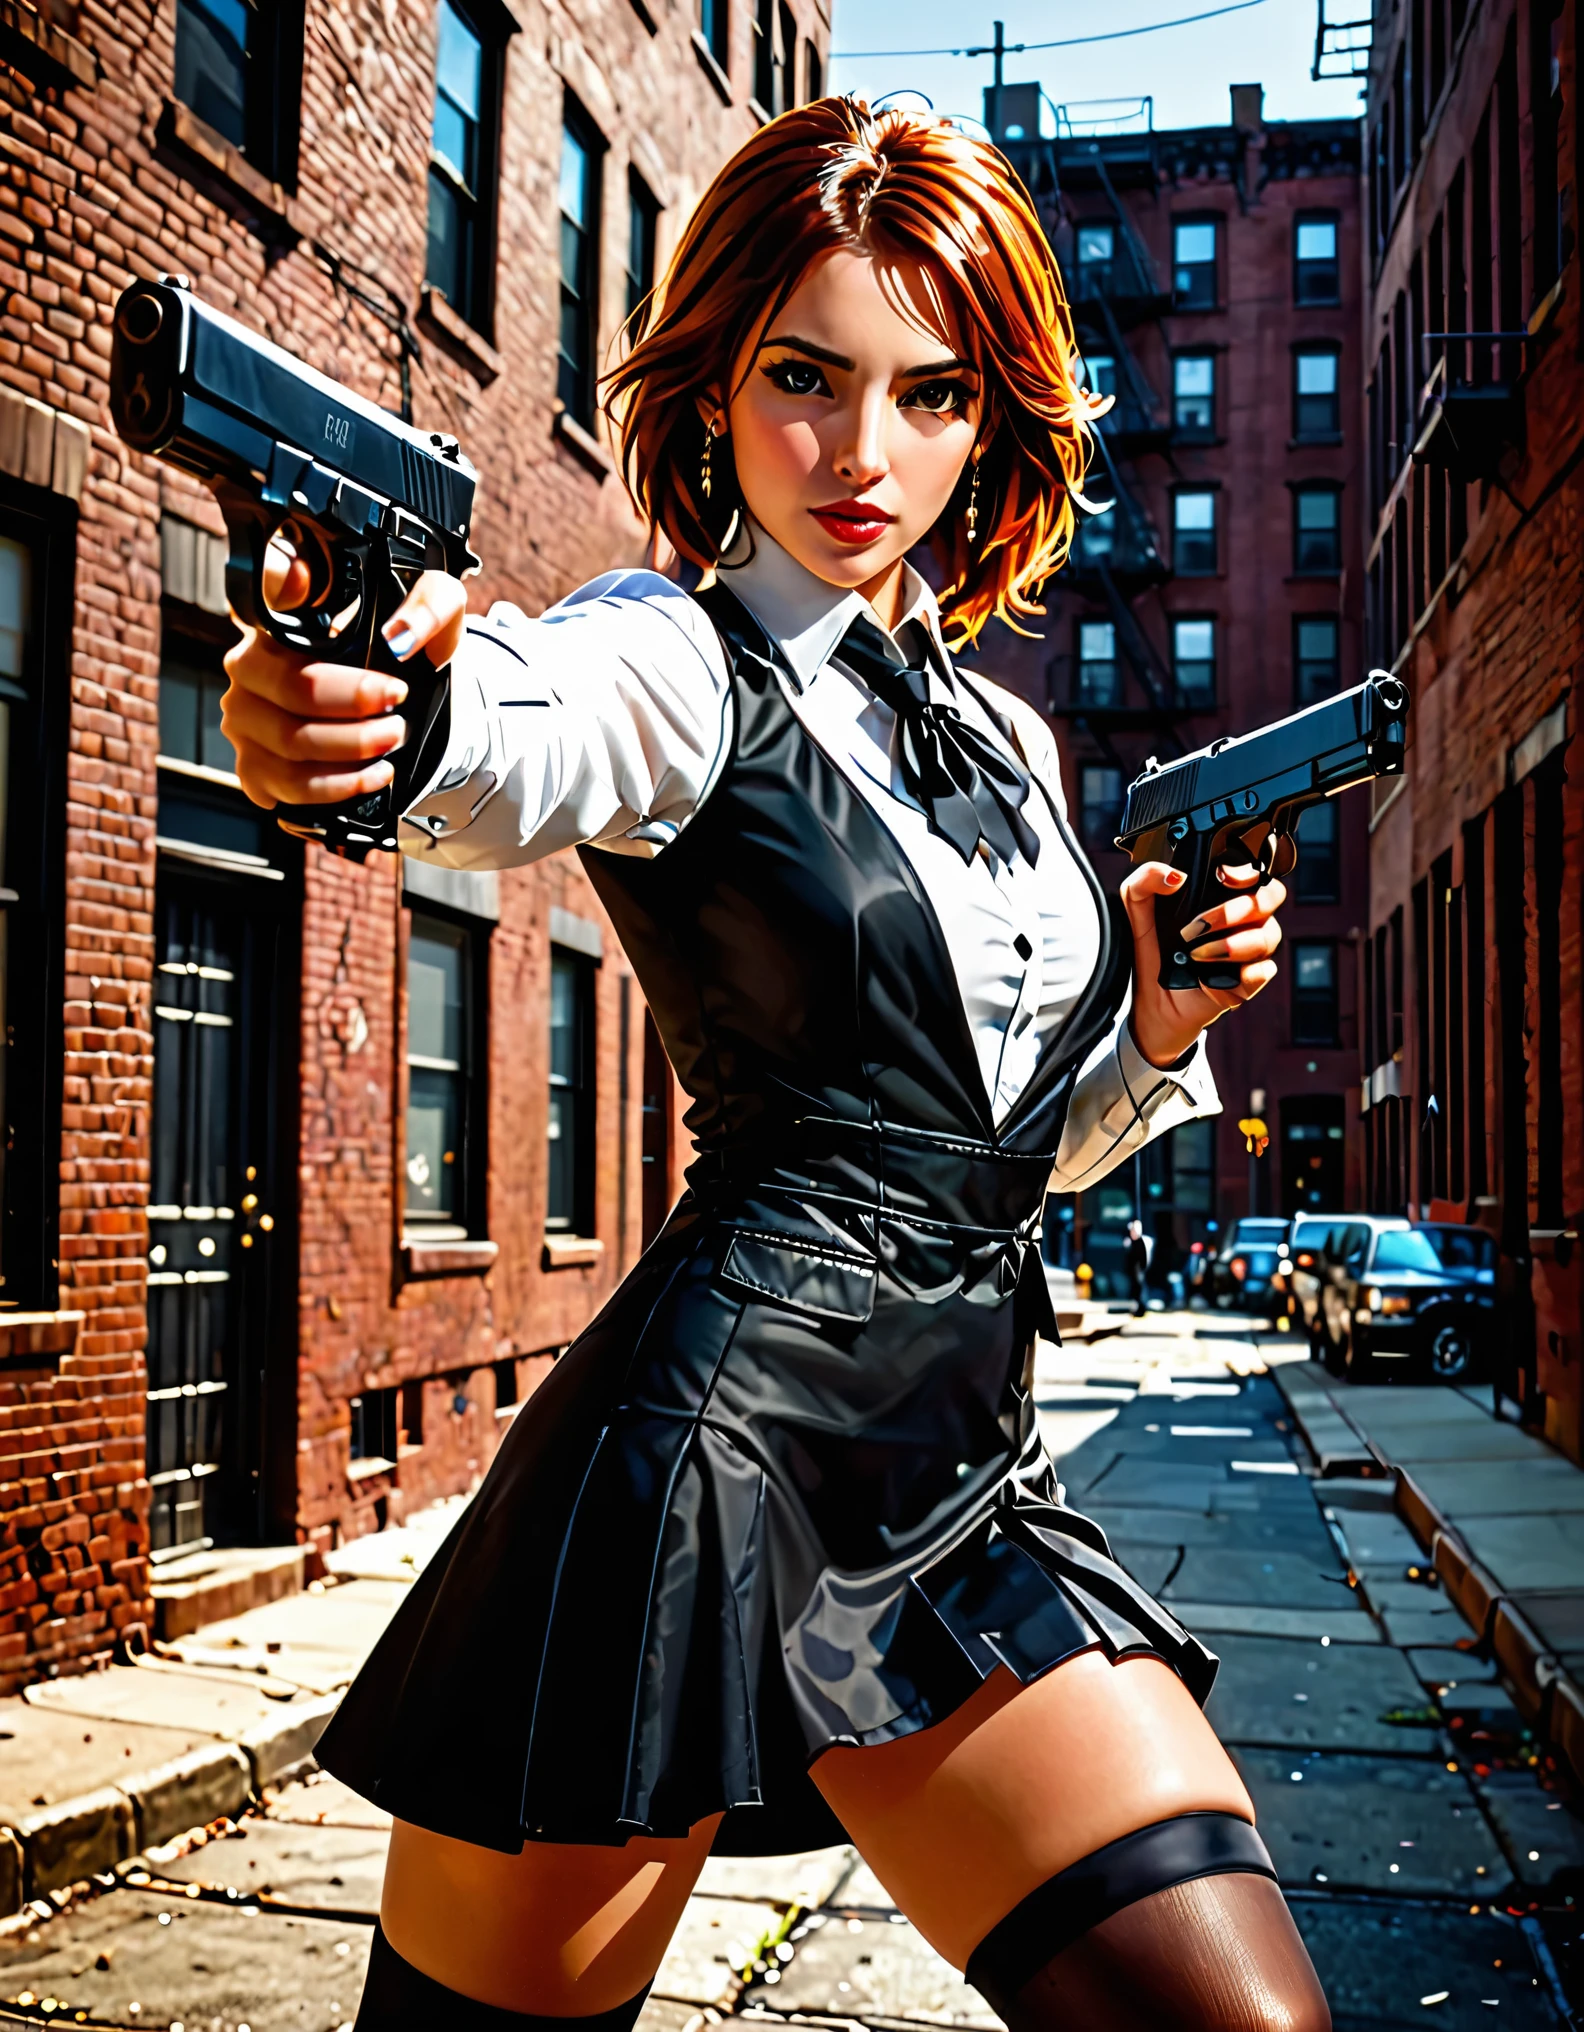 (better lighting, high contrast, sharp details), (a person:1.2+female) gangster, black suit and tie, White shirt, black skirt, polished black shoes, standing, dynamic action pose, holding two guns, Beretta 92, flash, Bullet shells, gun smoke, bullet holes, Pointing at the viewer, White fur, for the chestnut, medium hair, groomed hair, 28 years, intense action, Brooklyn, high end apartment backdrop, vivid colors, high saturation, dramatic shadows.